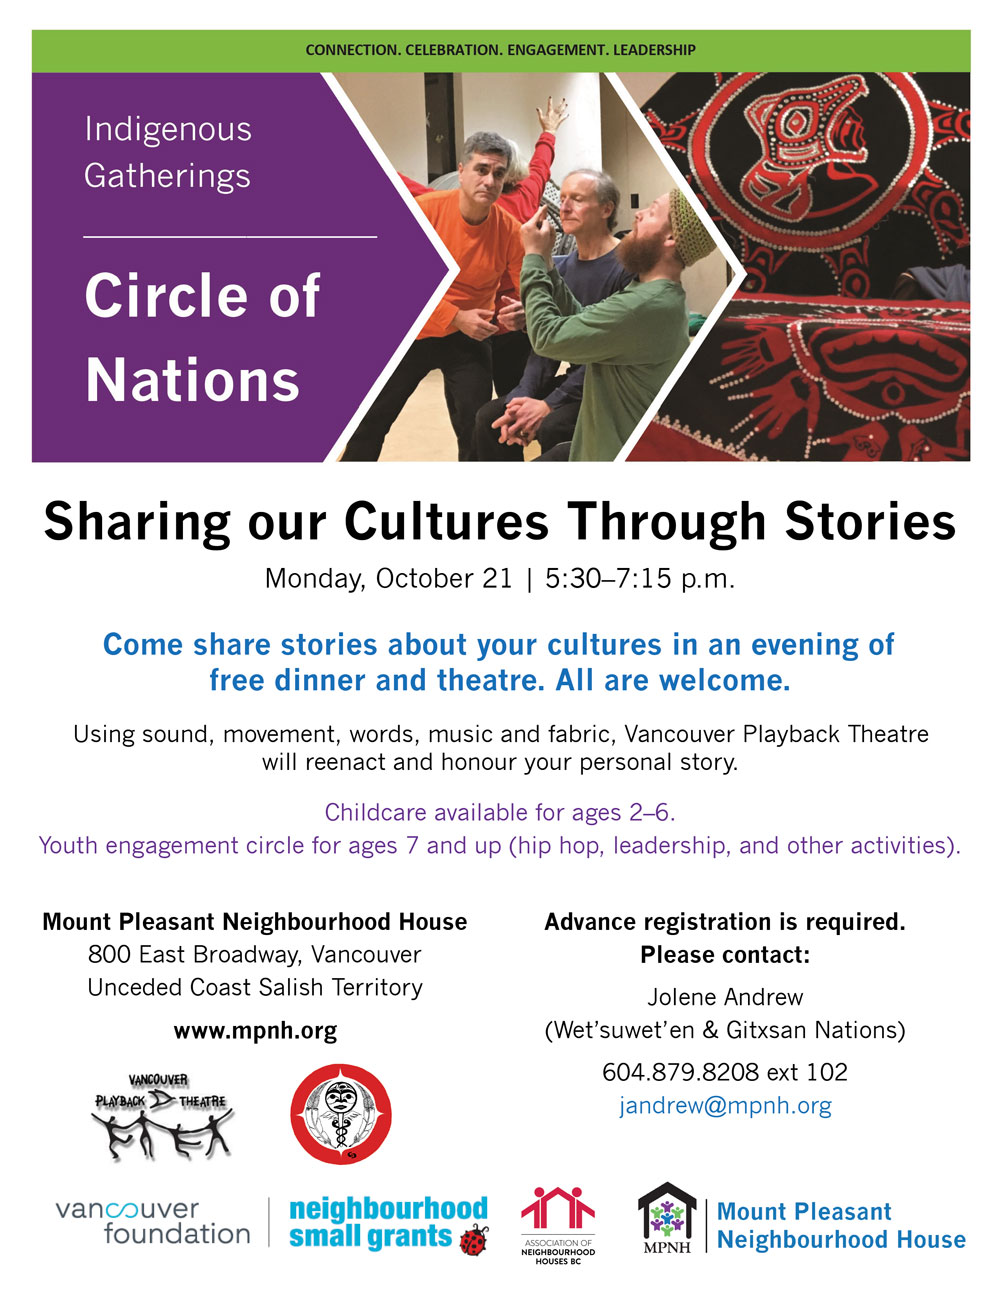 An image of the poster with event details, featuring a photo of people doing a dramatic reenactment, and a photo of Indigenous regalia